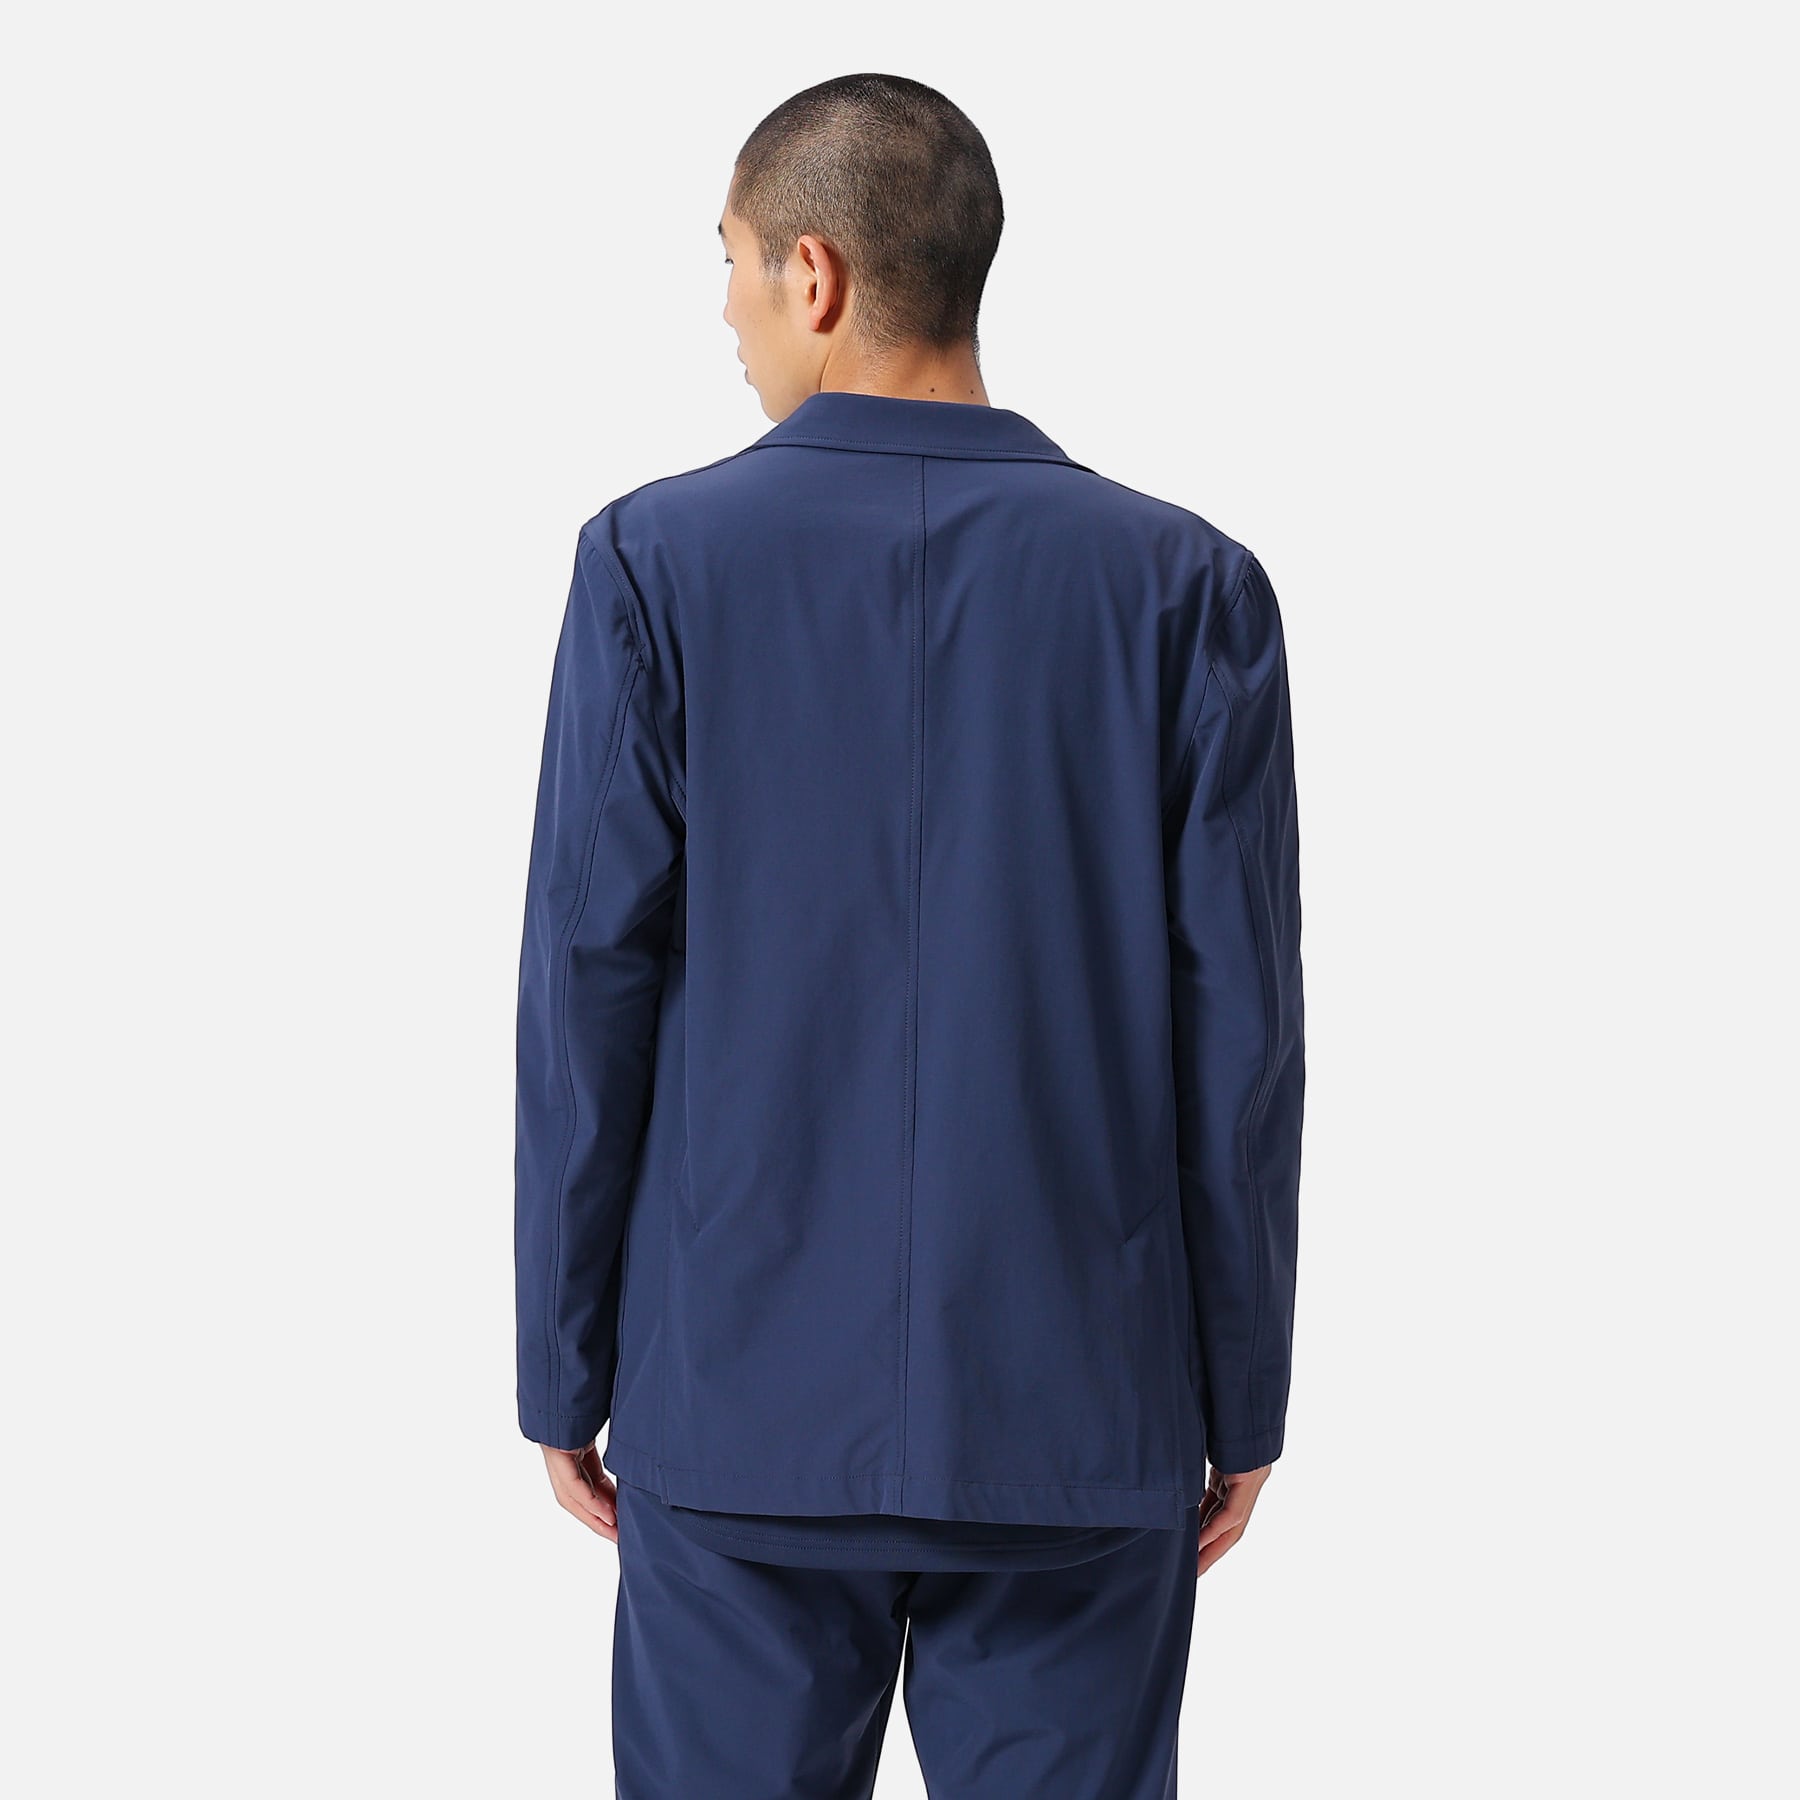 FCRB 22AW jacket Msize navy-